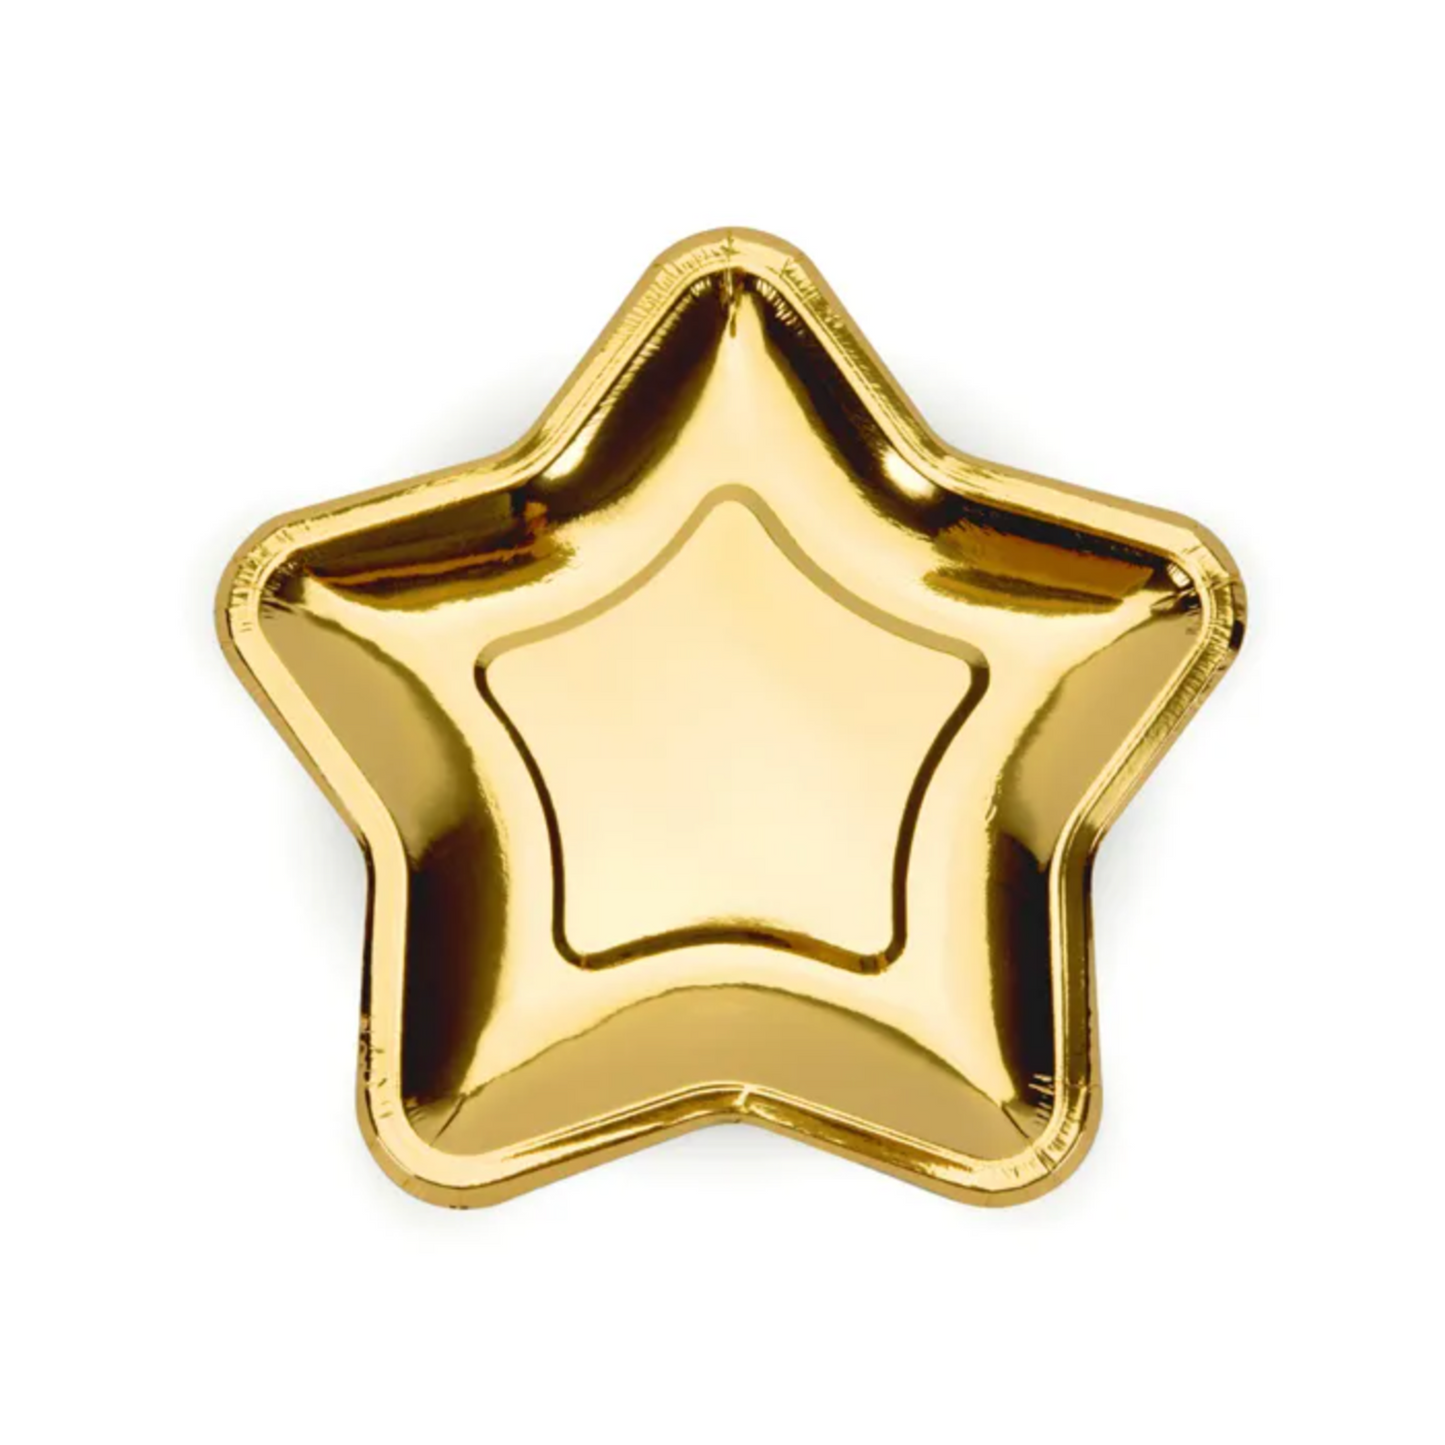 gold star shaped paper plate